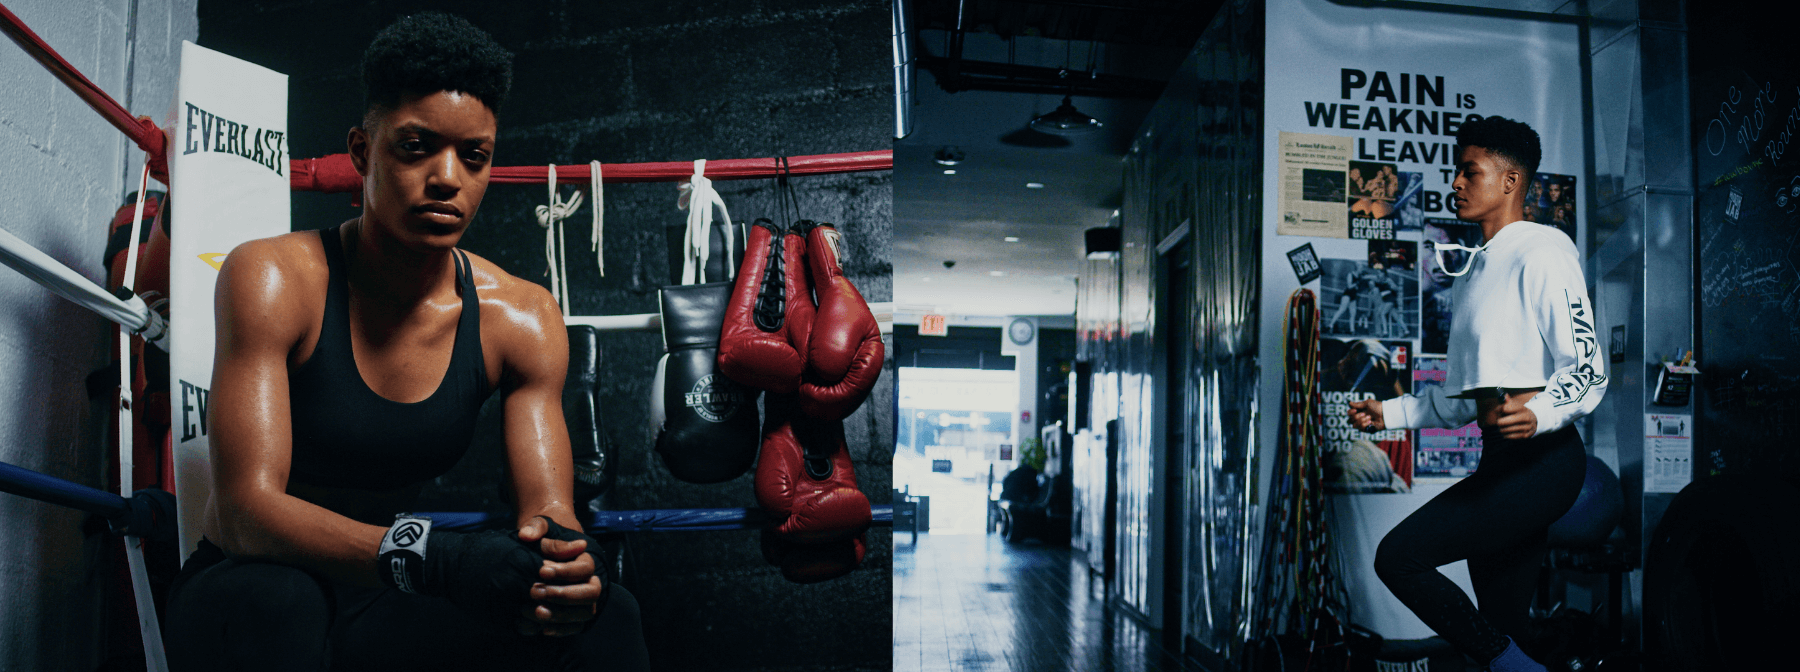 How This NYC Boxer Used Nutrition To Fight A Career Low | Stacia Suttles Is Forever Fit